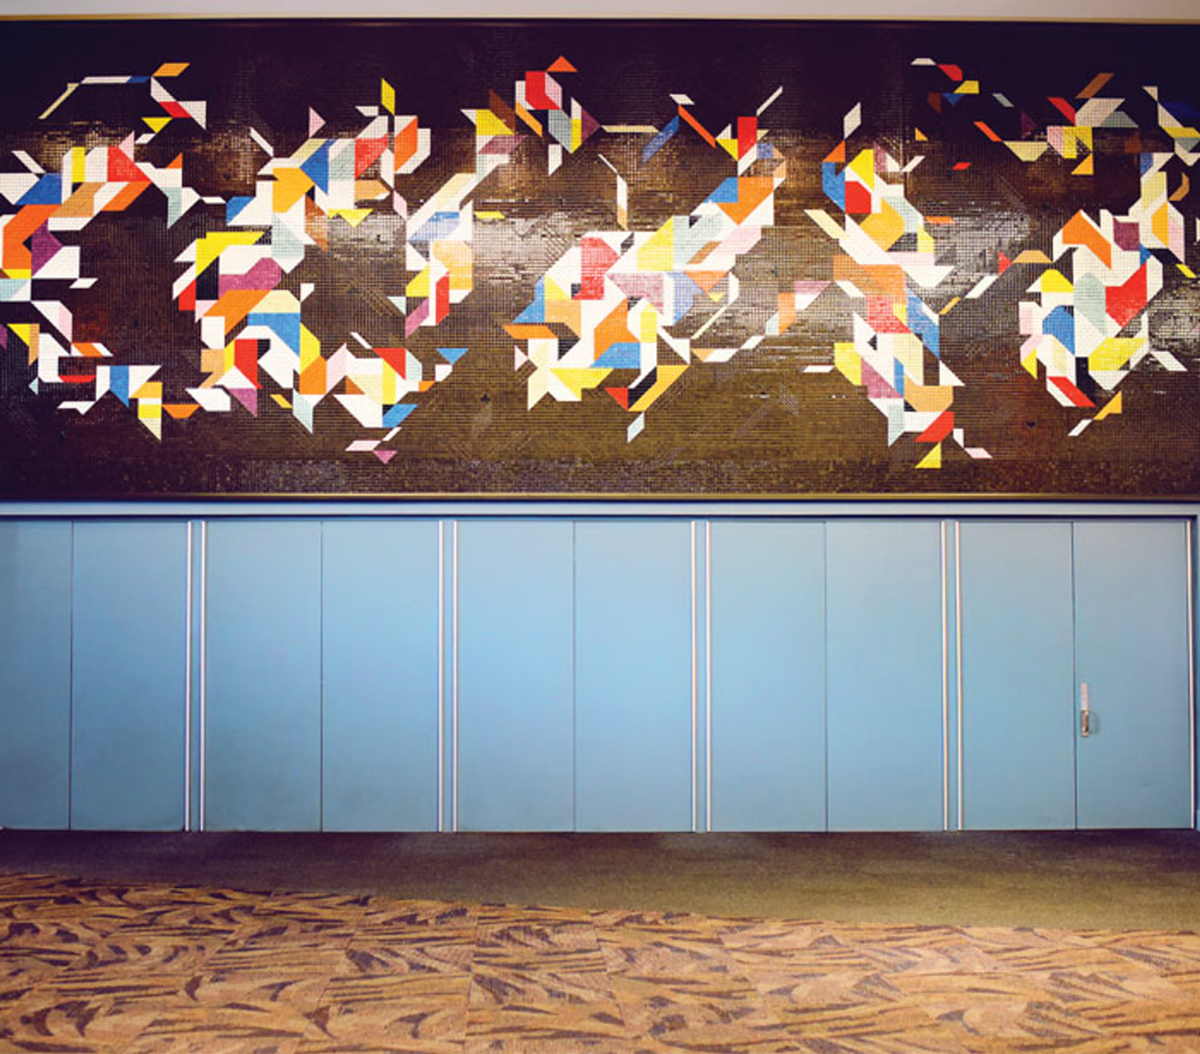 Charley Harper's "Space Walk" Mural at the Convention Center